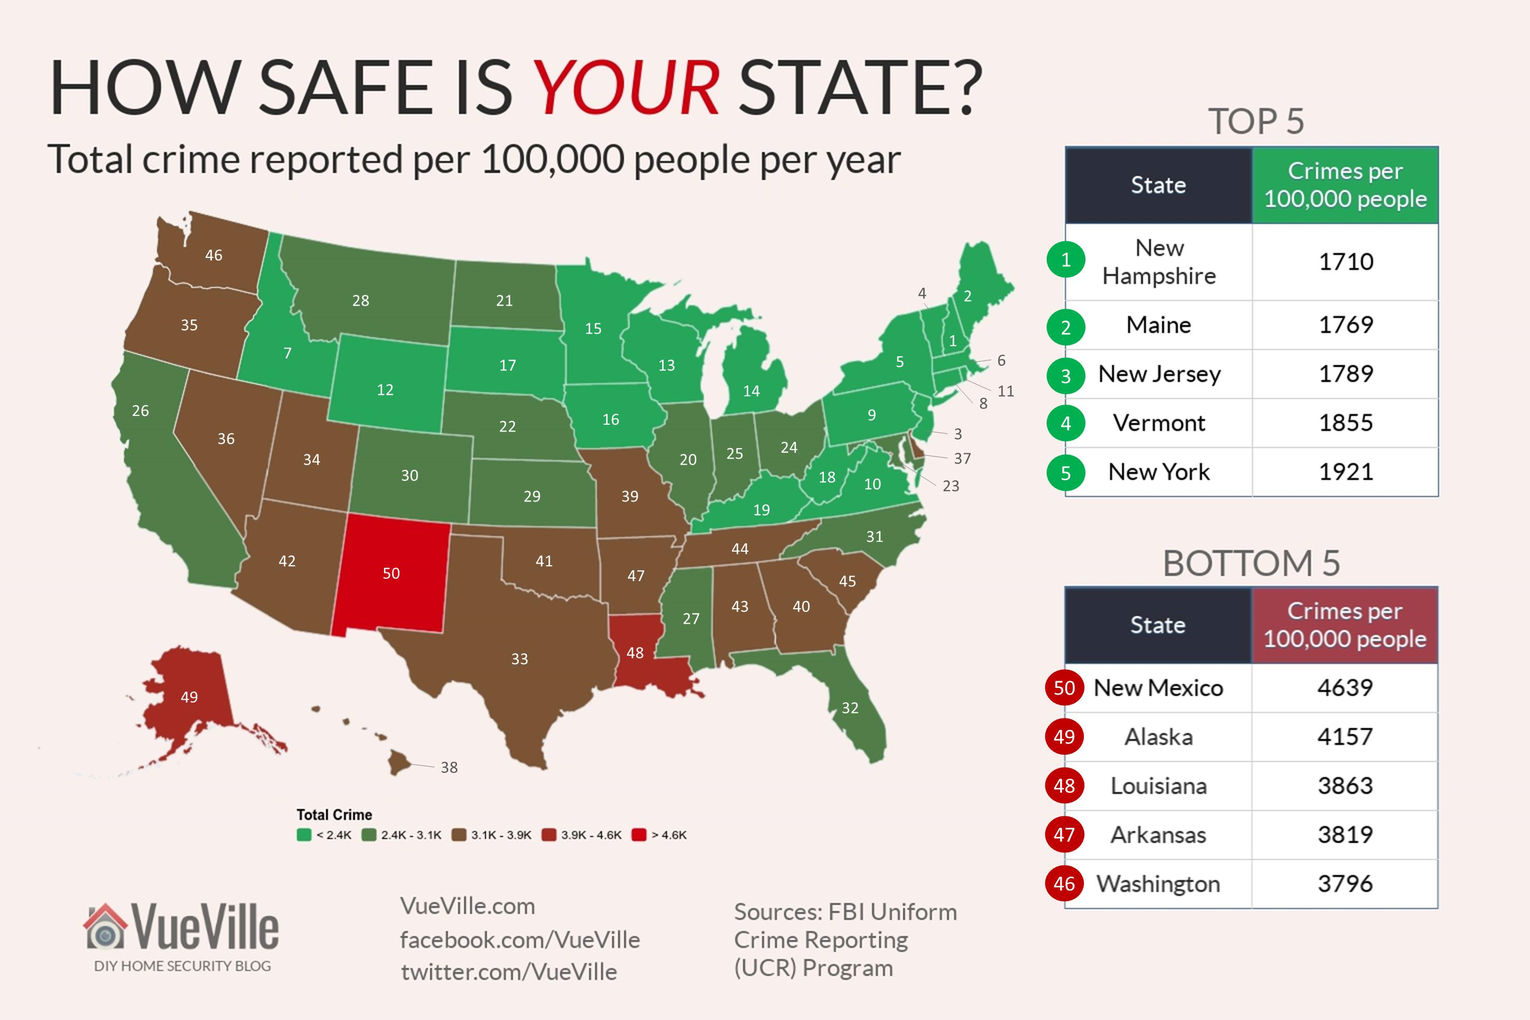 The-Safest-States-to-Live-In-Crime-Heat-Map-of-America-VueVille-1.jpg